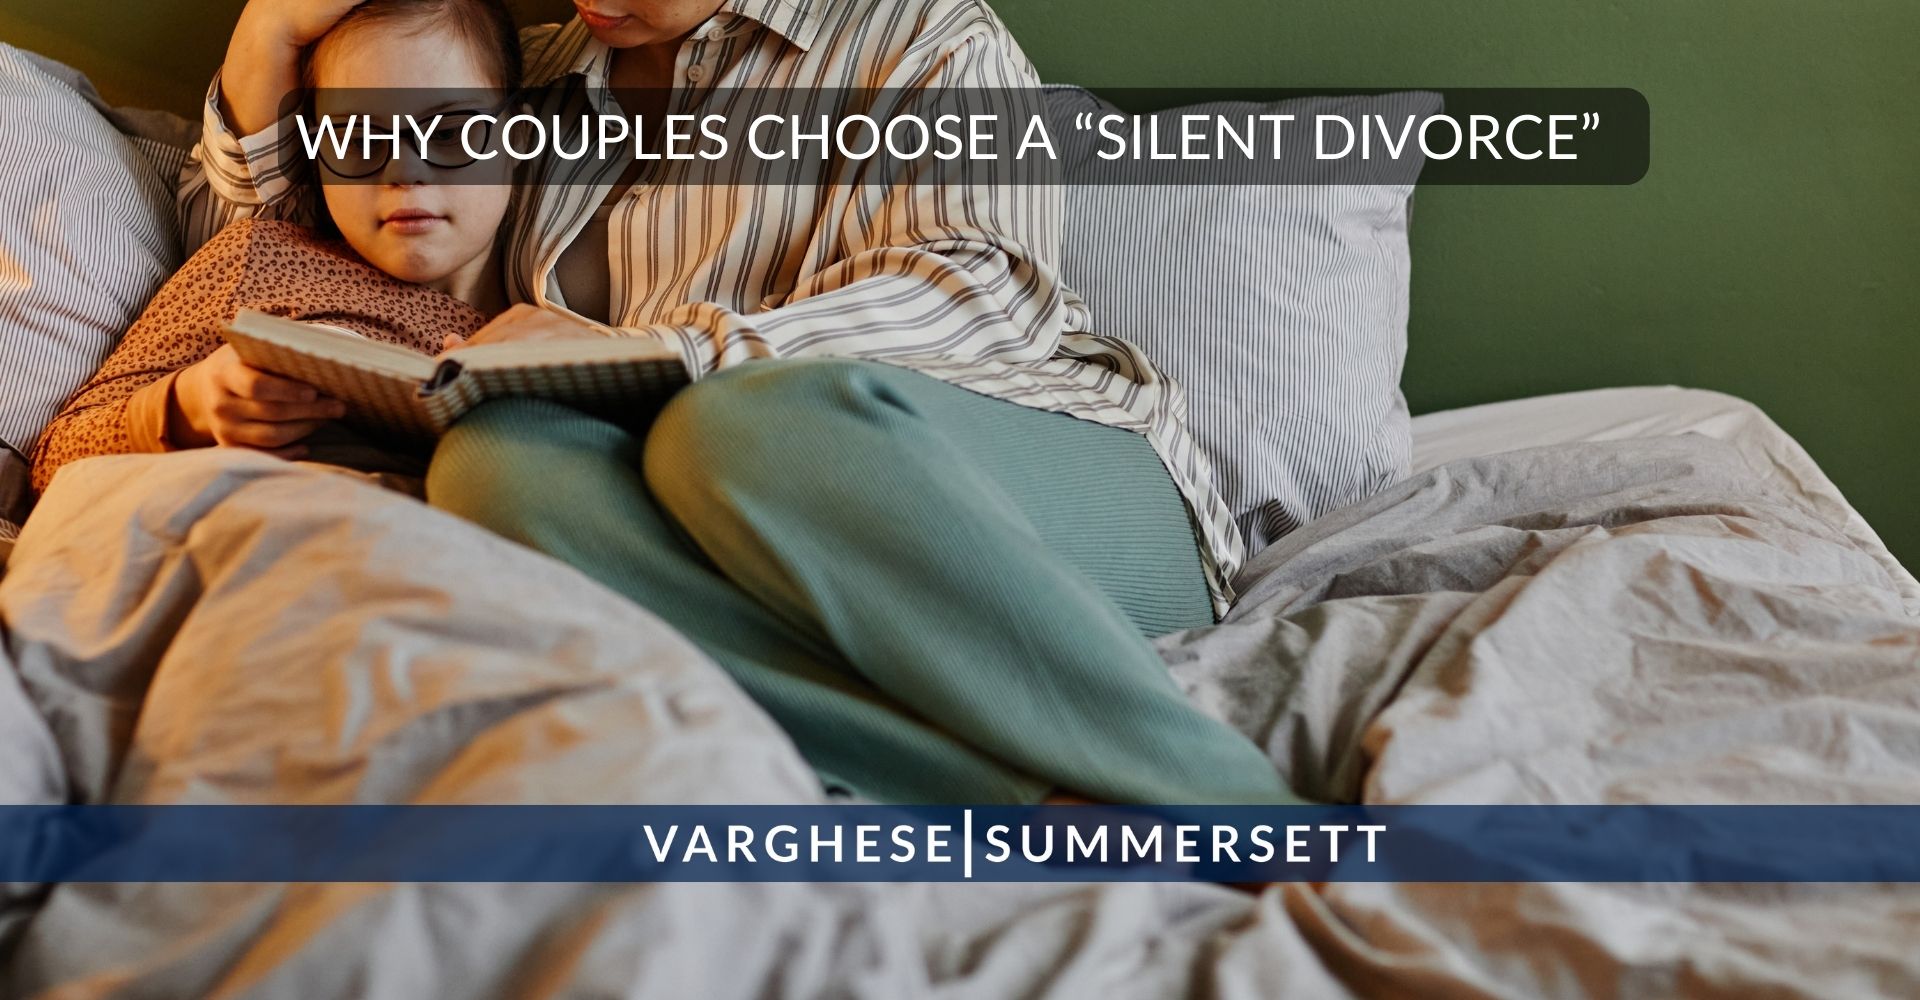 Reasons for a Silent Divorce